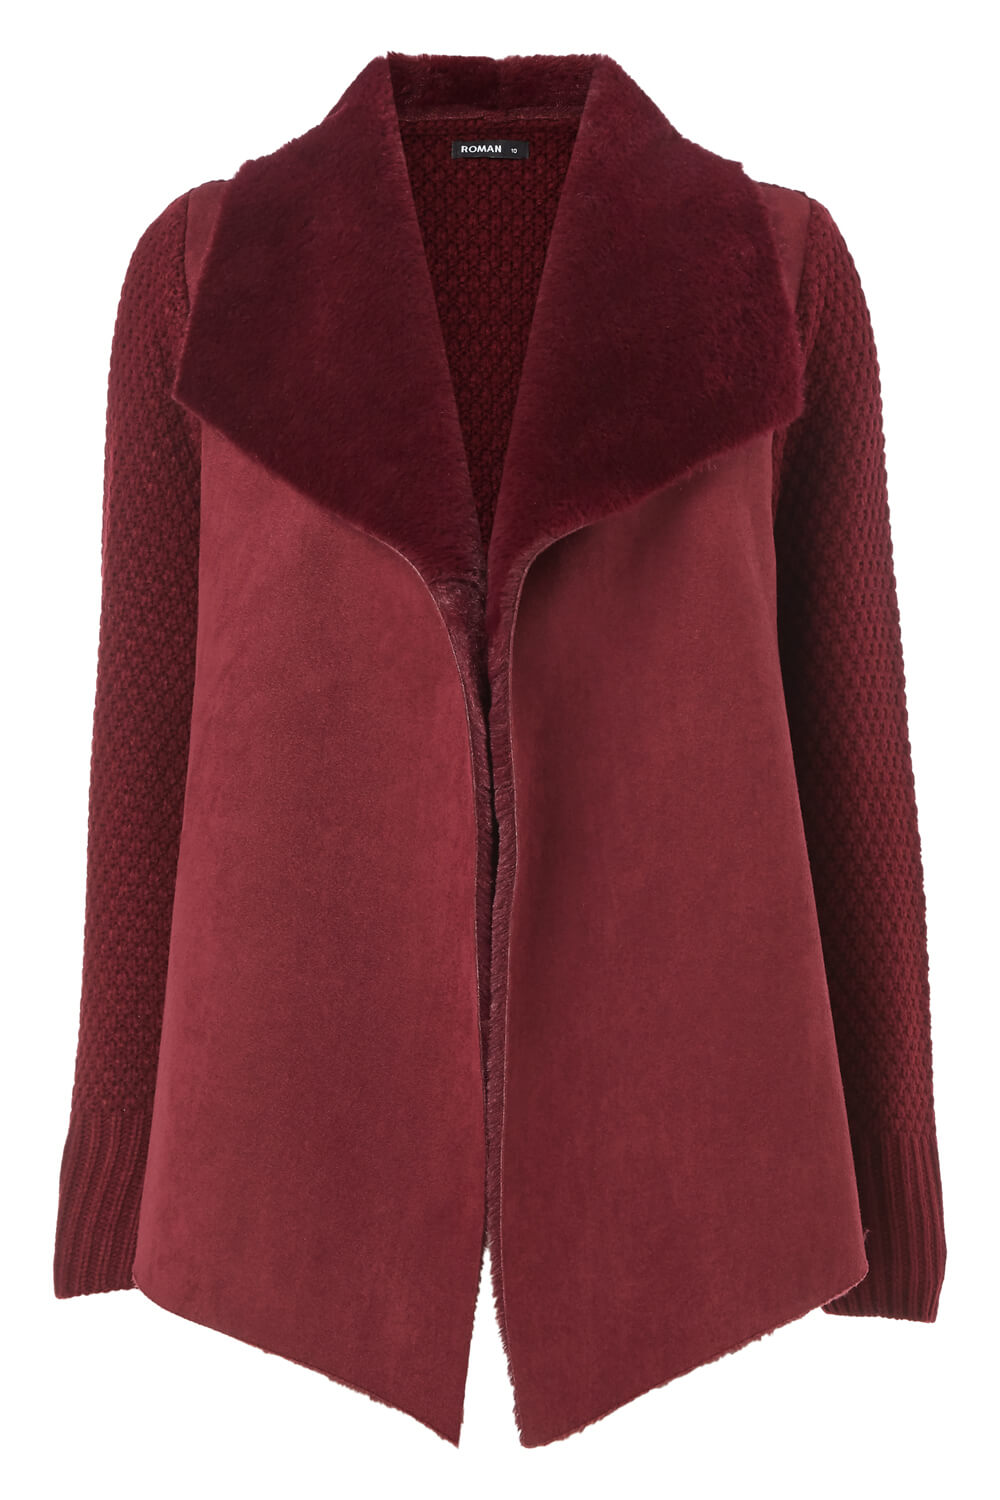 Red Faux Shearling Cardigan, Image 5 of 5